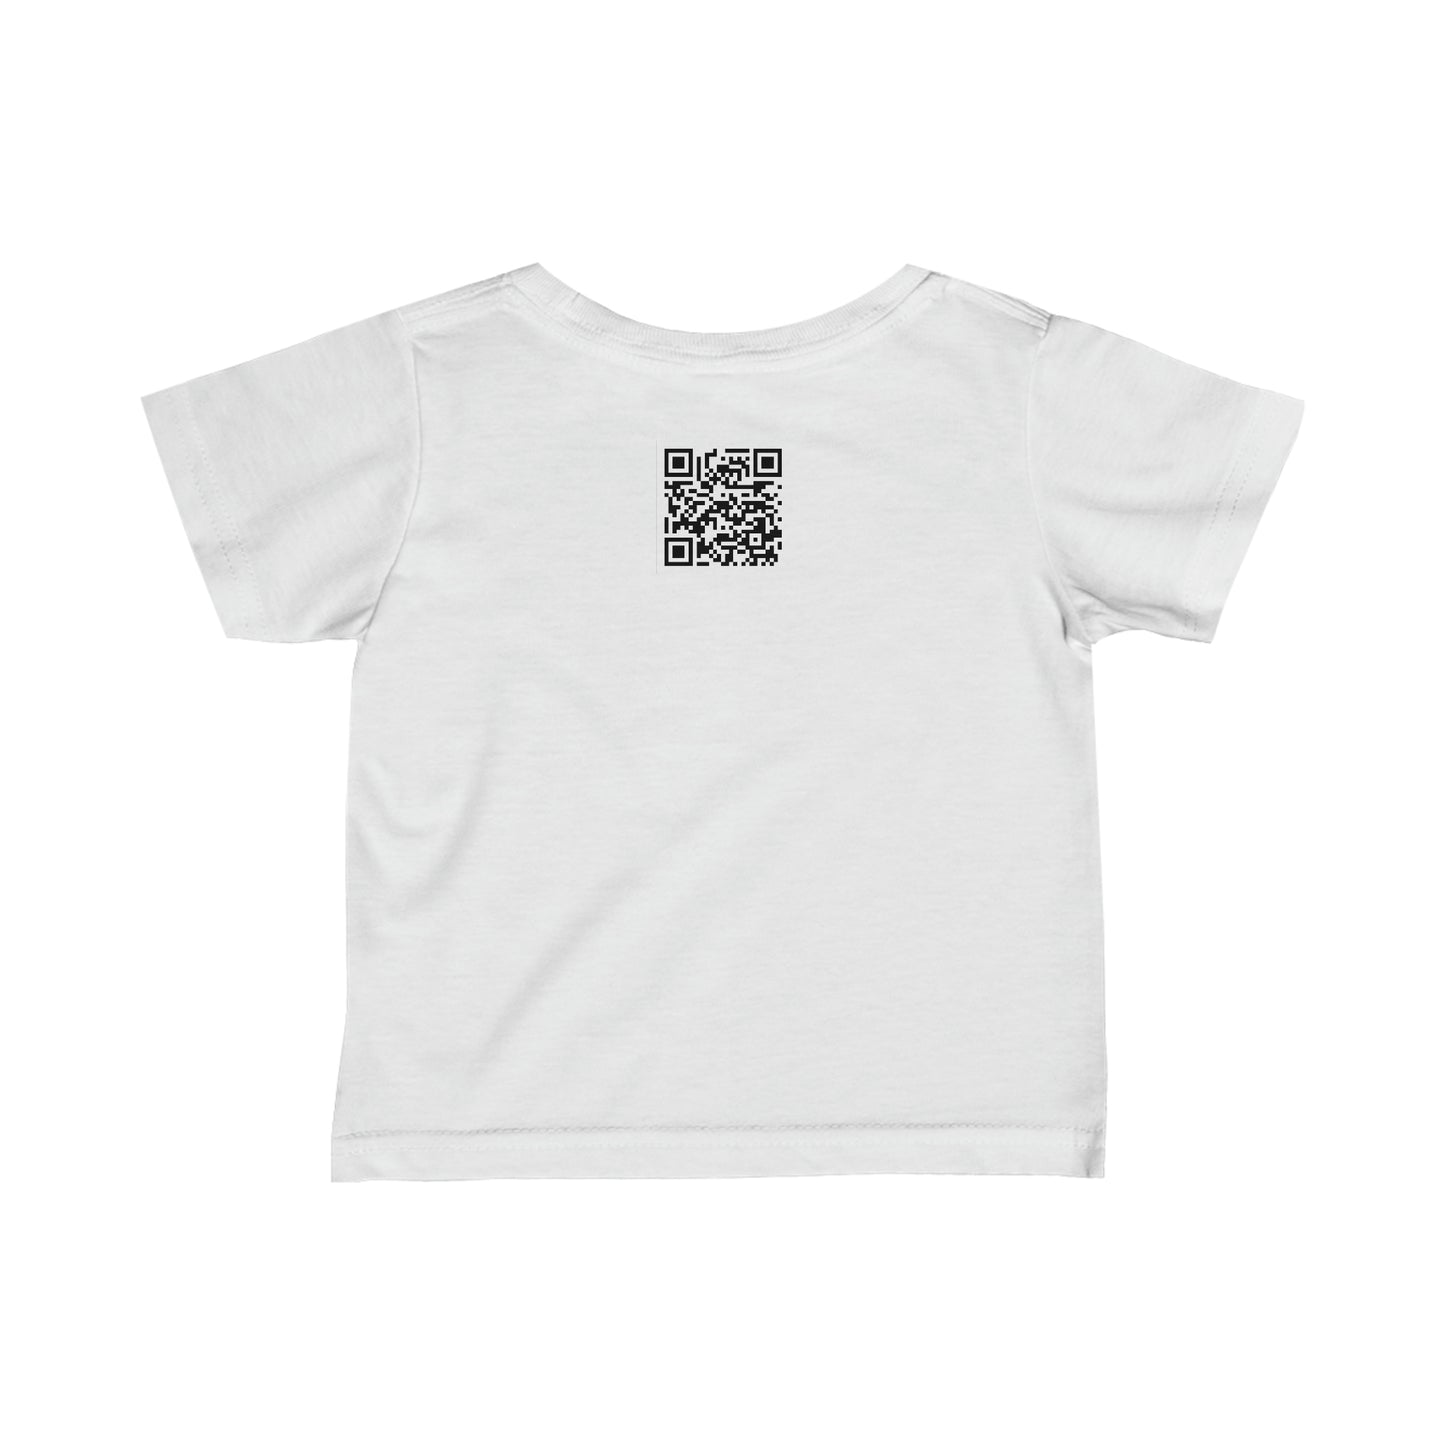 Messina Glam Infant Fine Jersey Tee